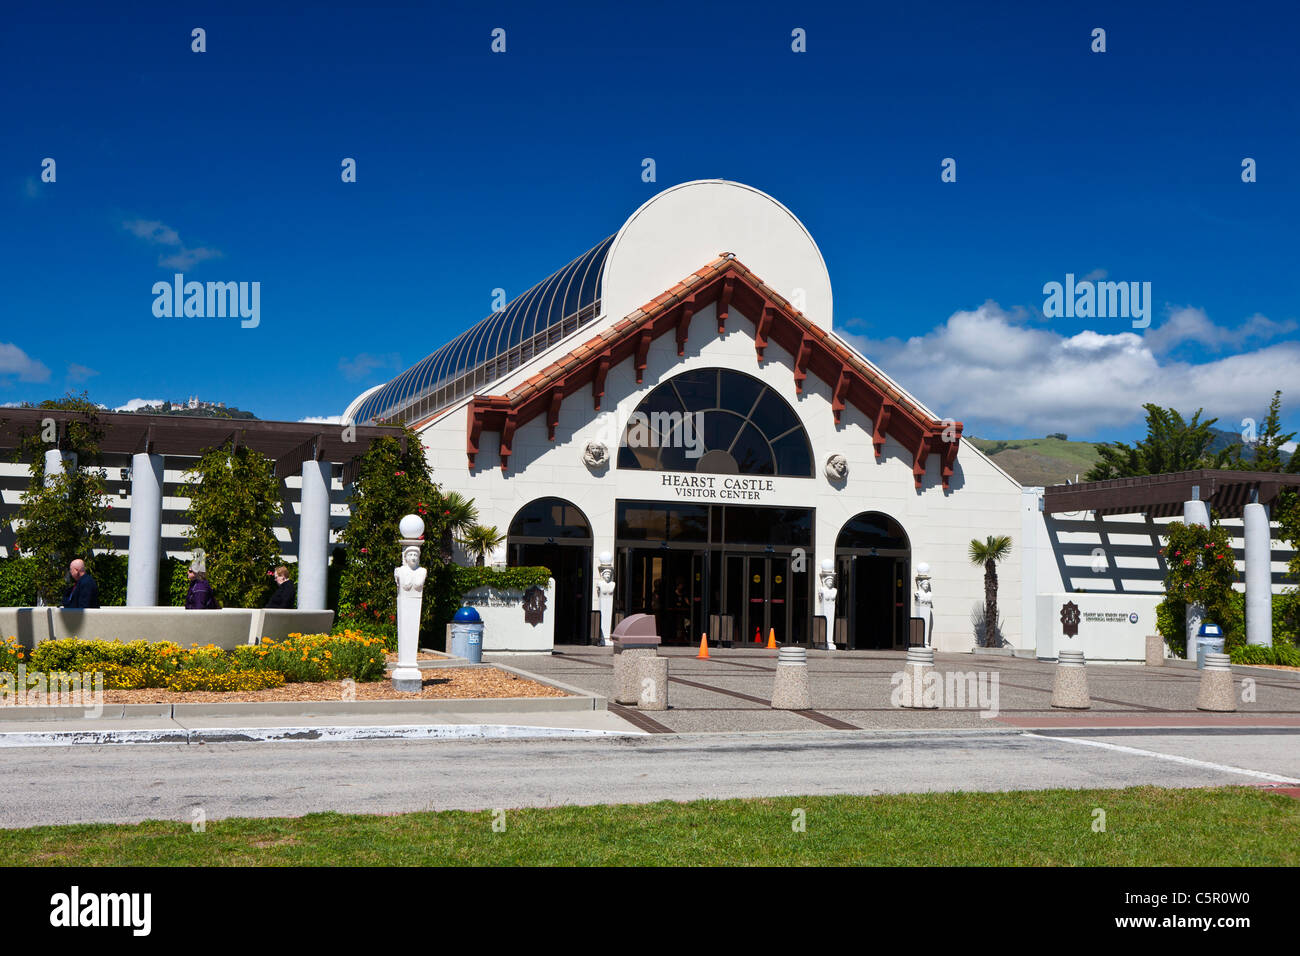 Exterior of the Hearst Castle Visitor's Center, San Simeon, California, United States of America Stock Photo